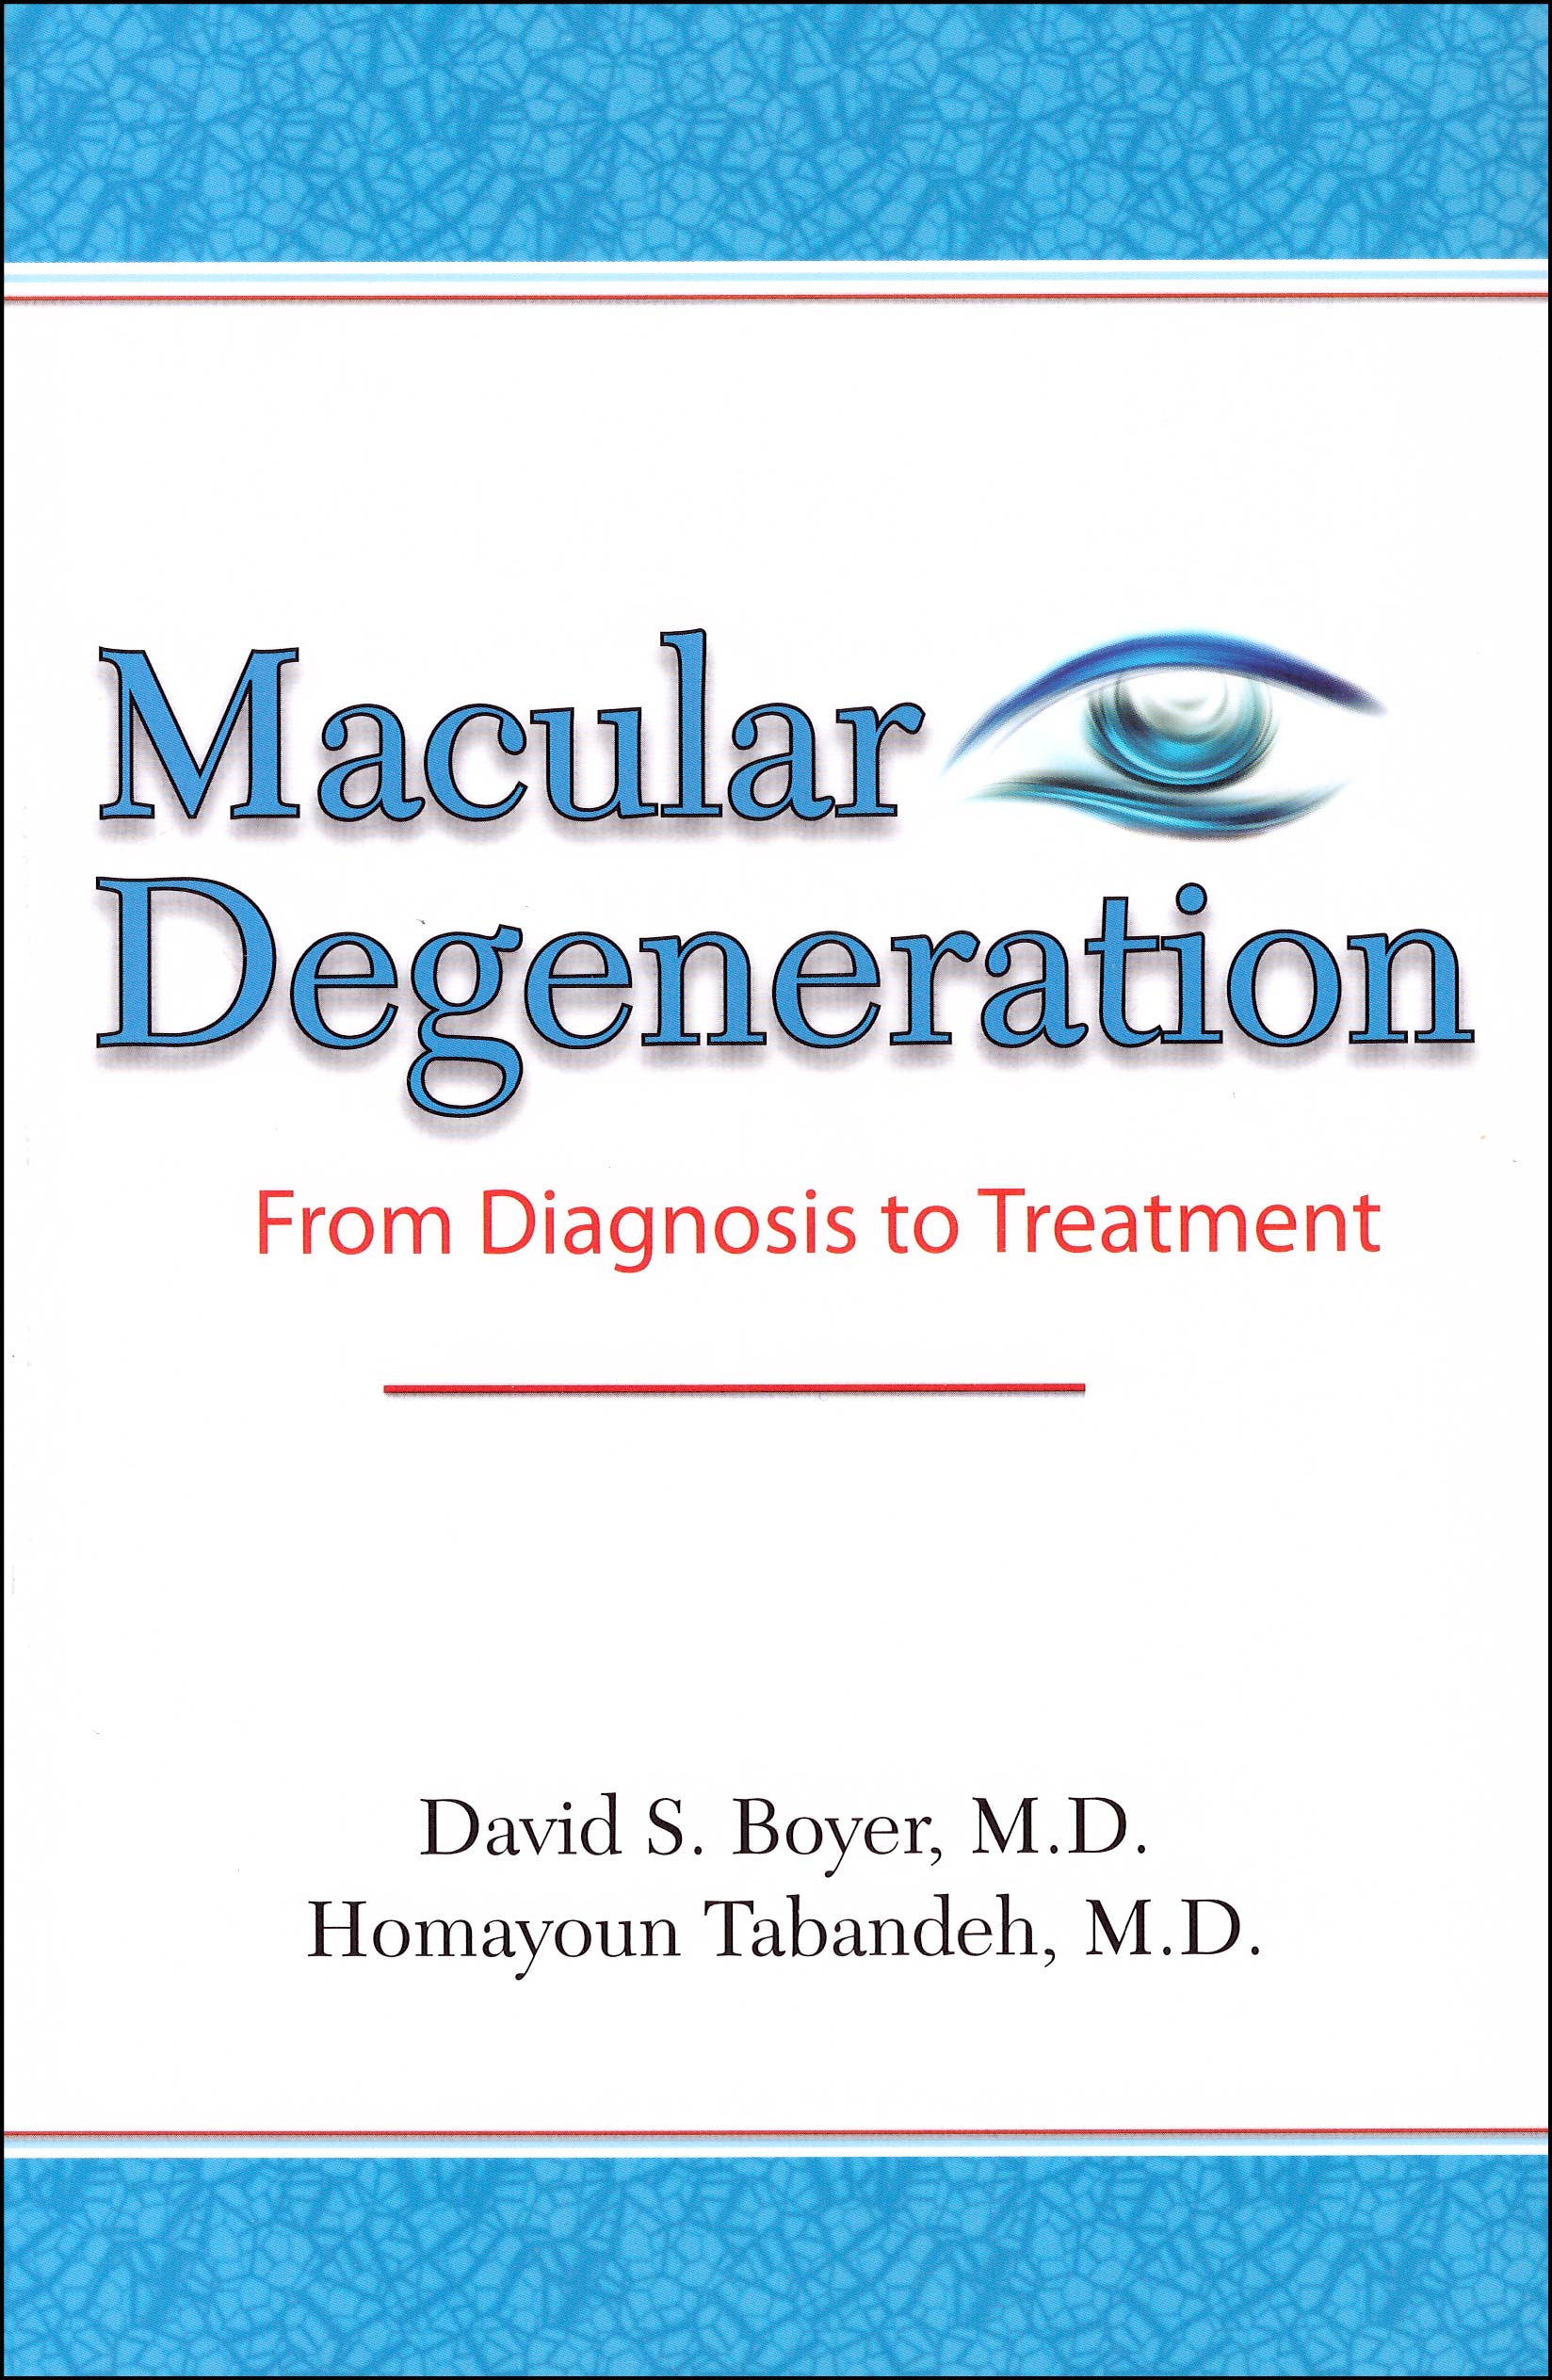 Macular Degeneration From Diagnosis to Treatment